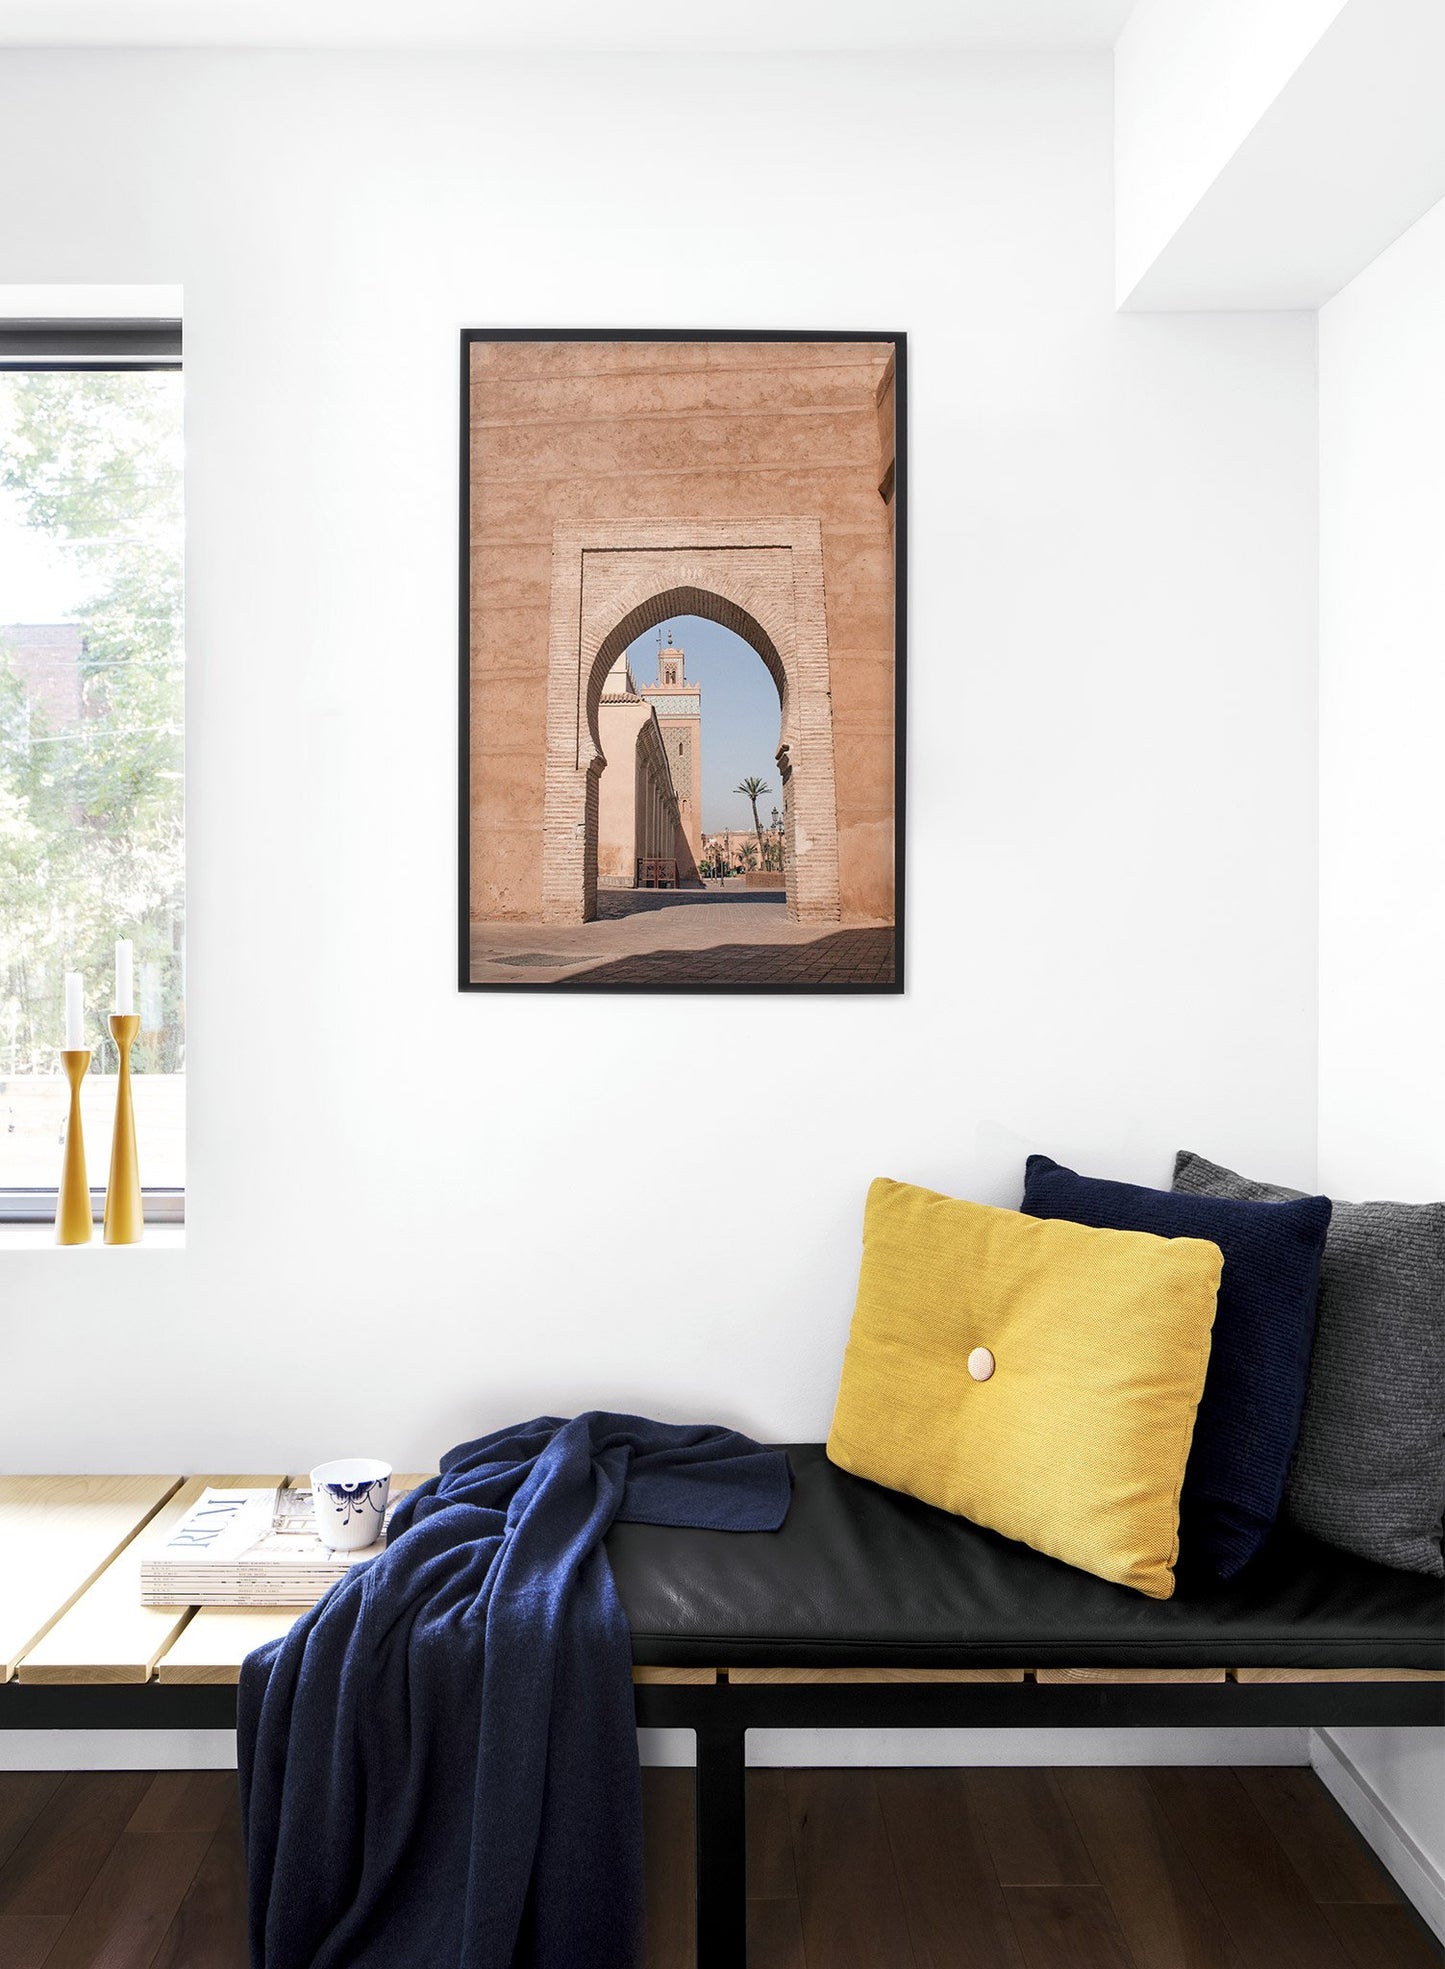 Modern photography poster by Opposite Wall with arched doorway into Morocco - Lifestyle - Bedroom